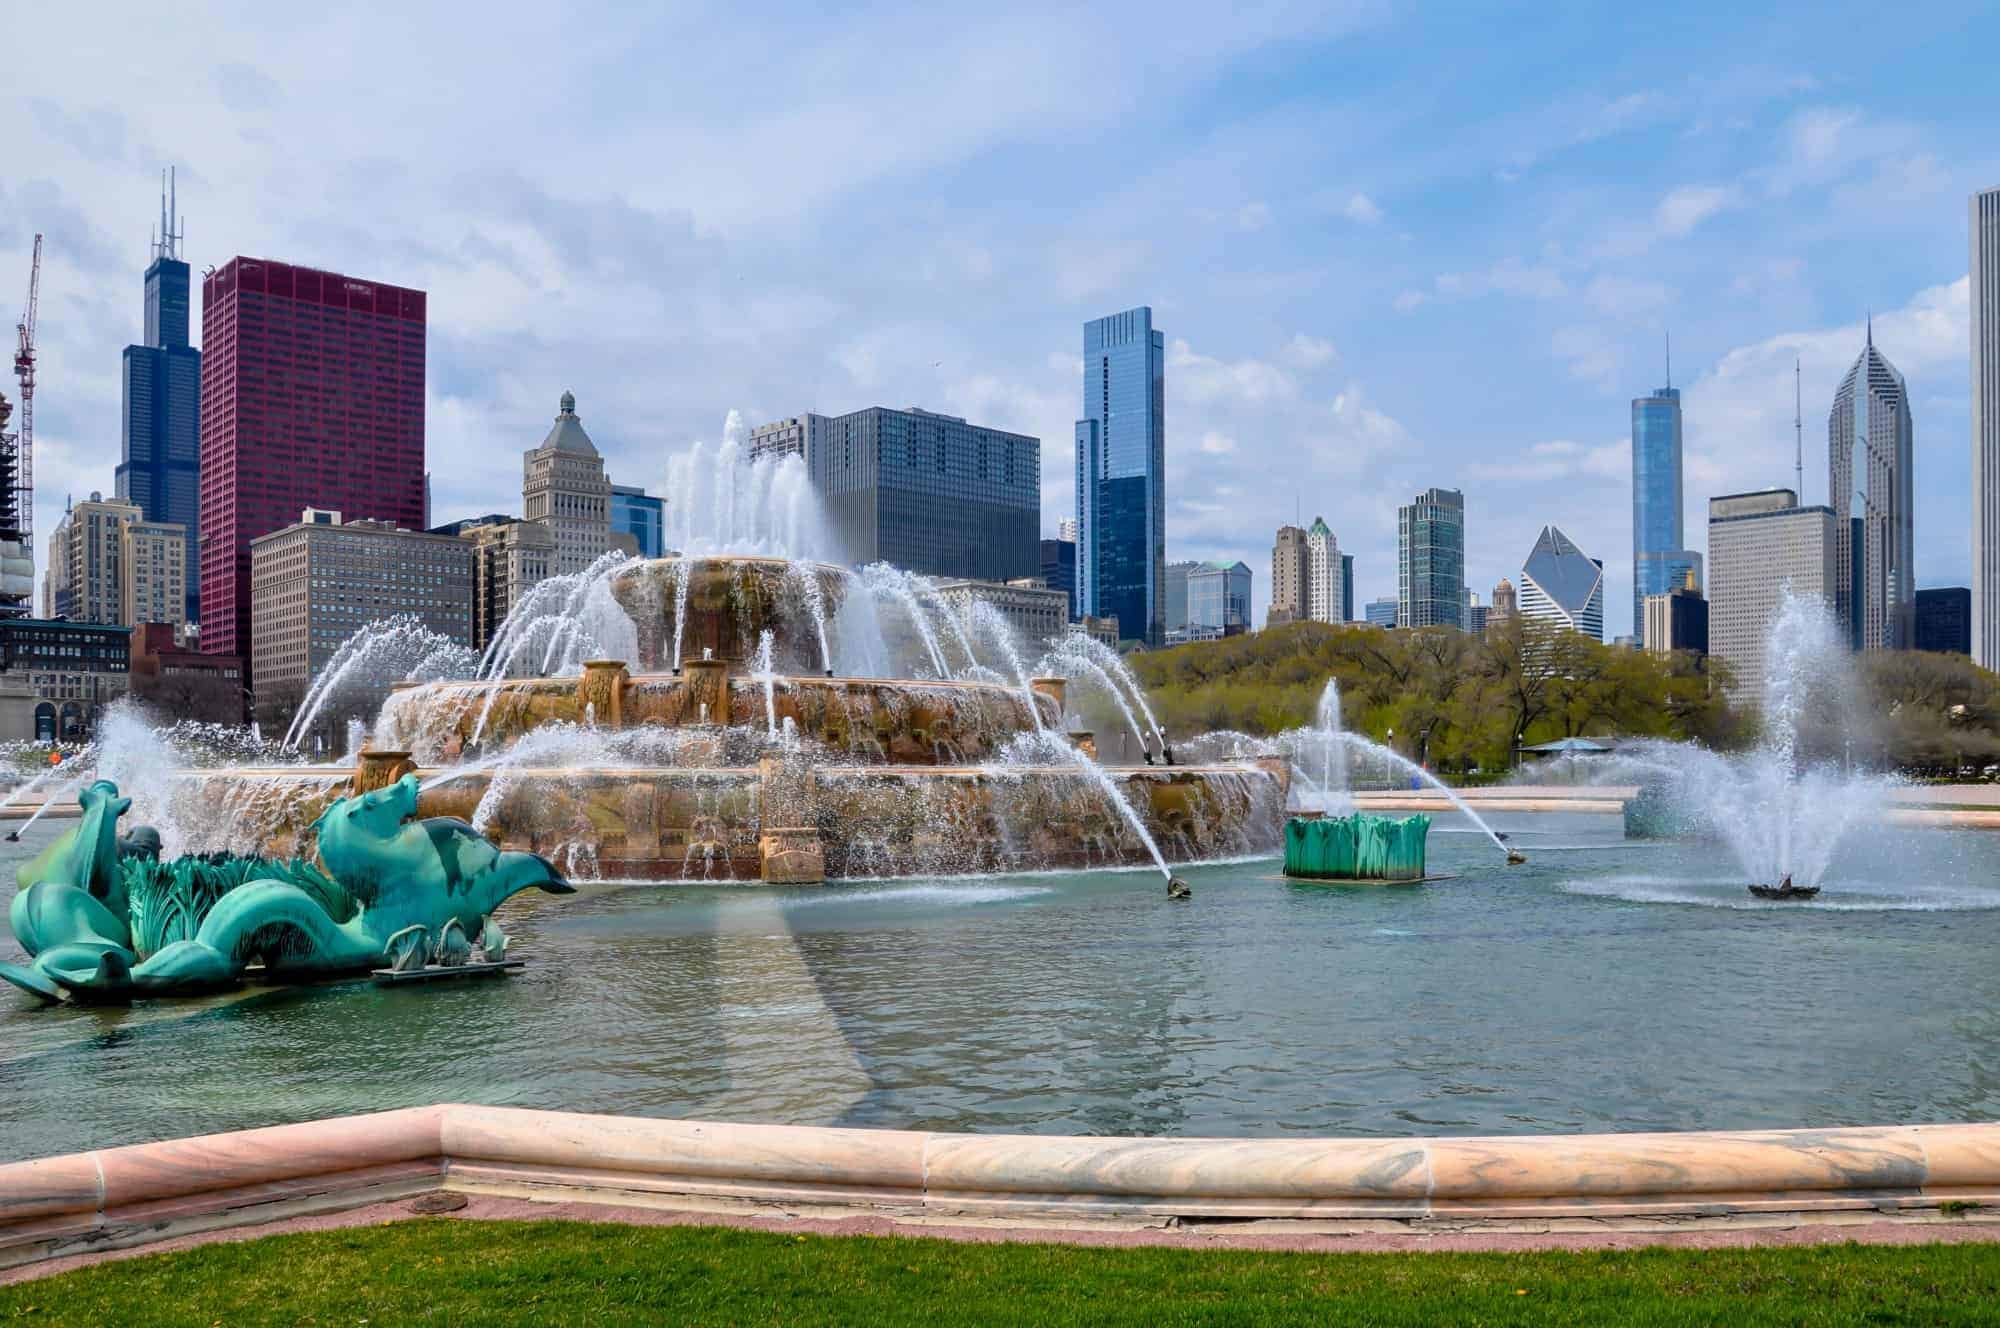 things to do in chicago with kids